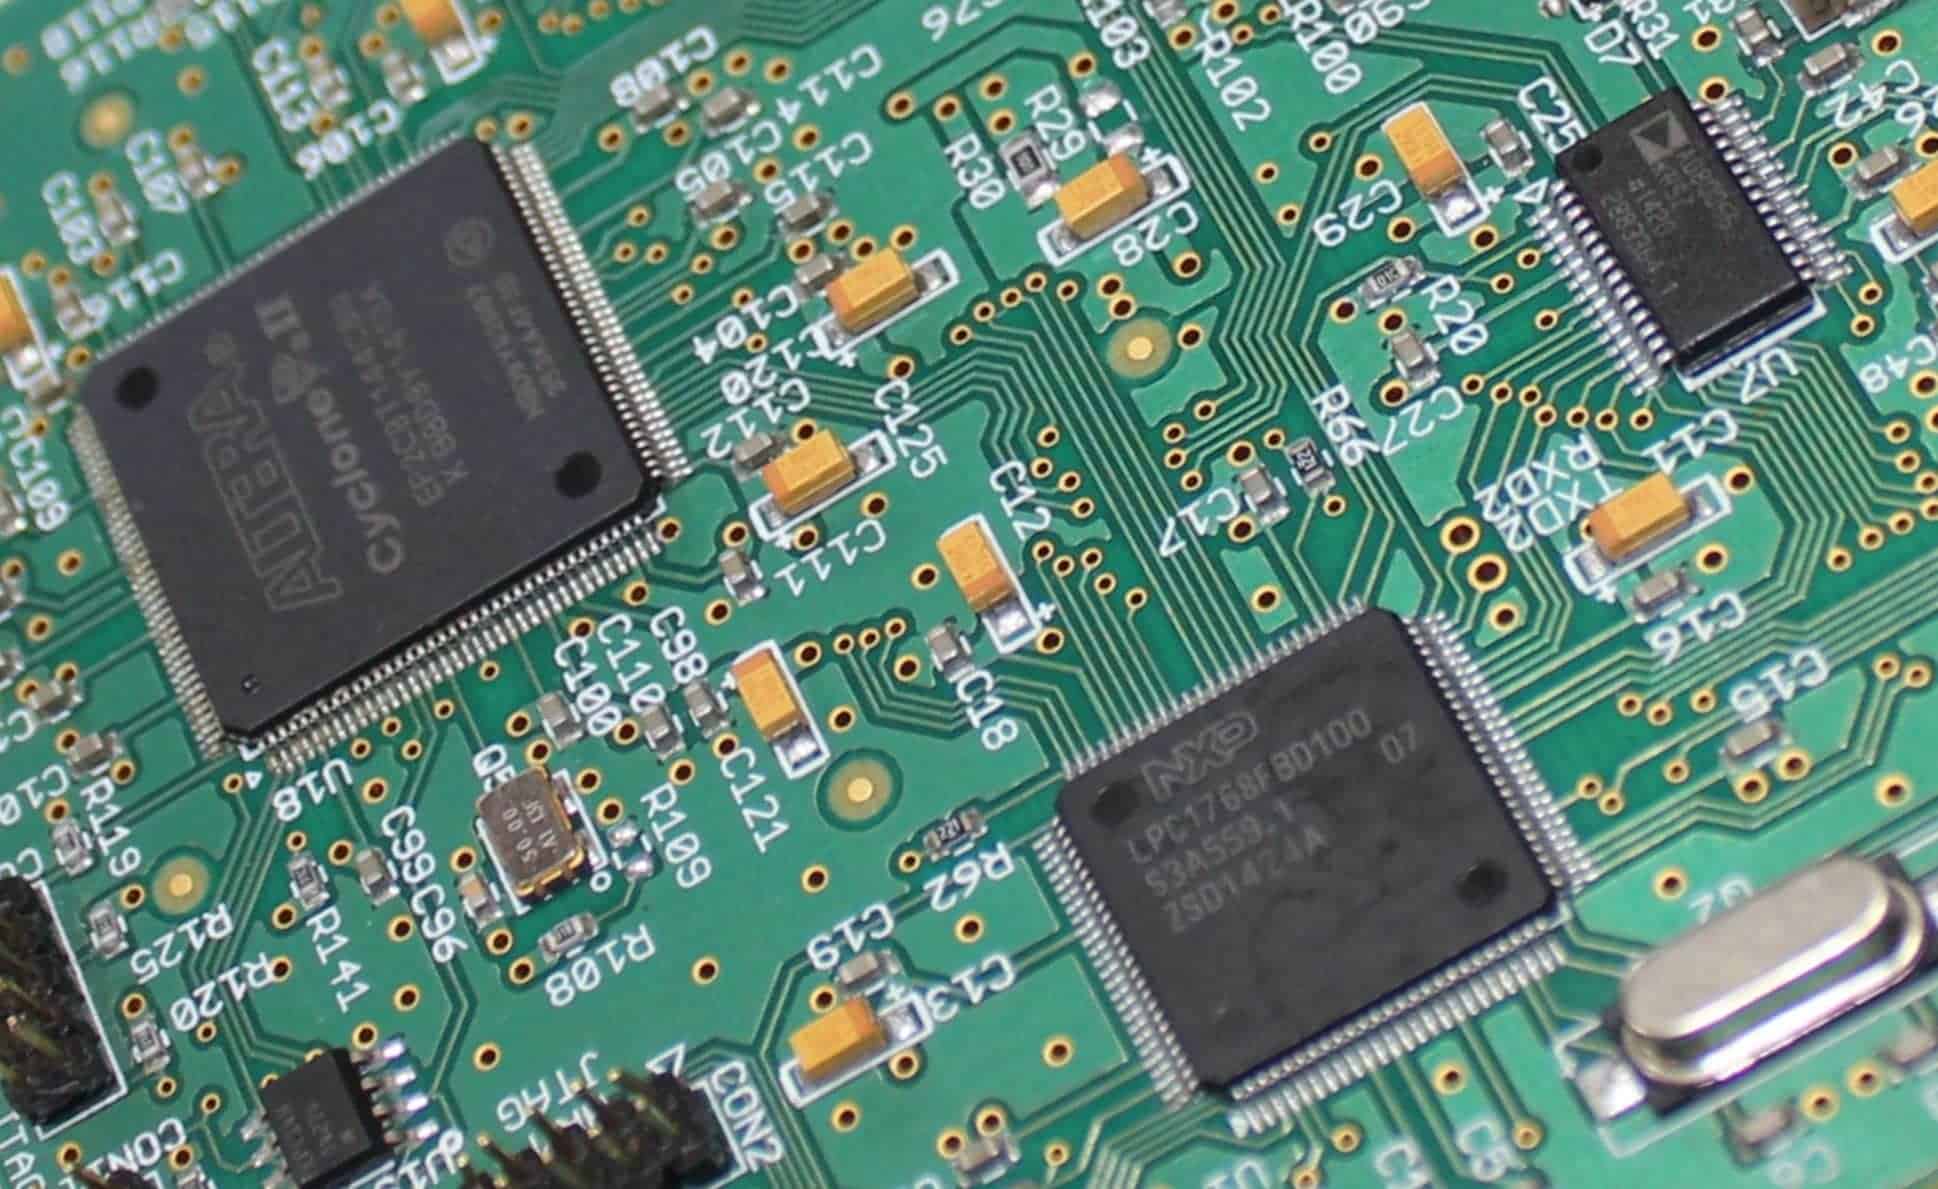 FPGA Vs Microcontroller: When to Use What? - TronicsZone